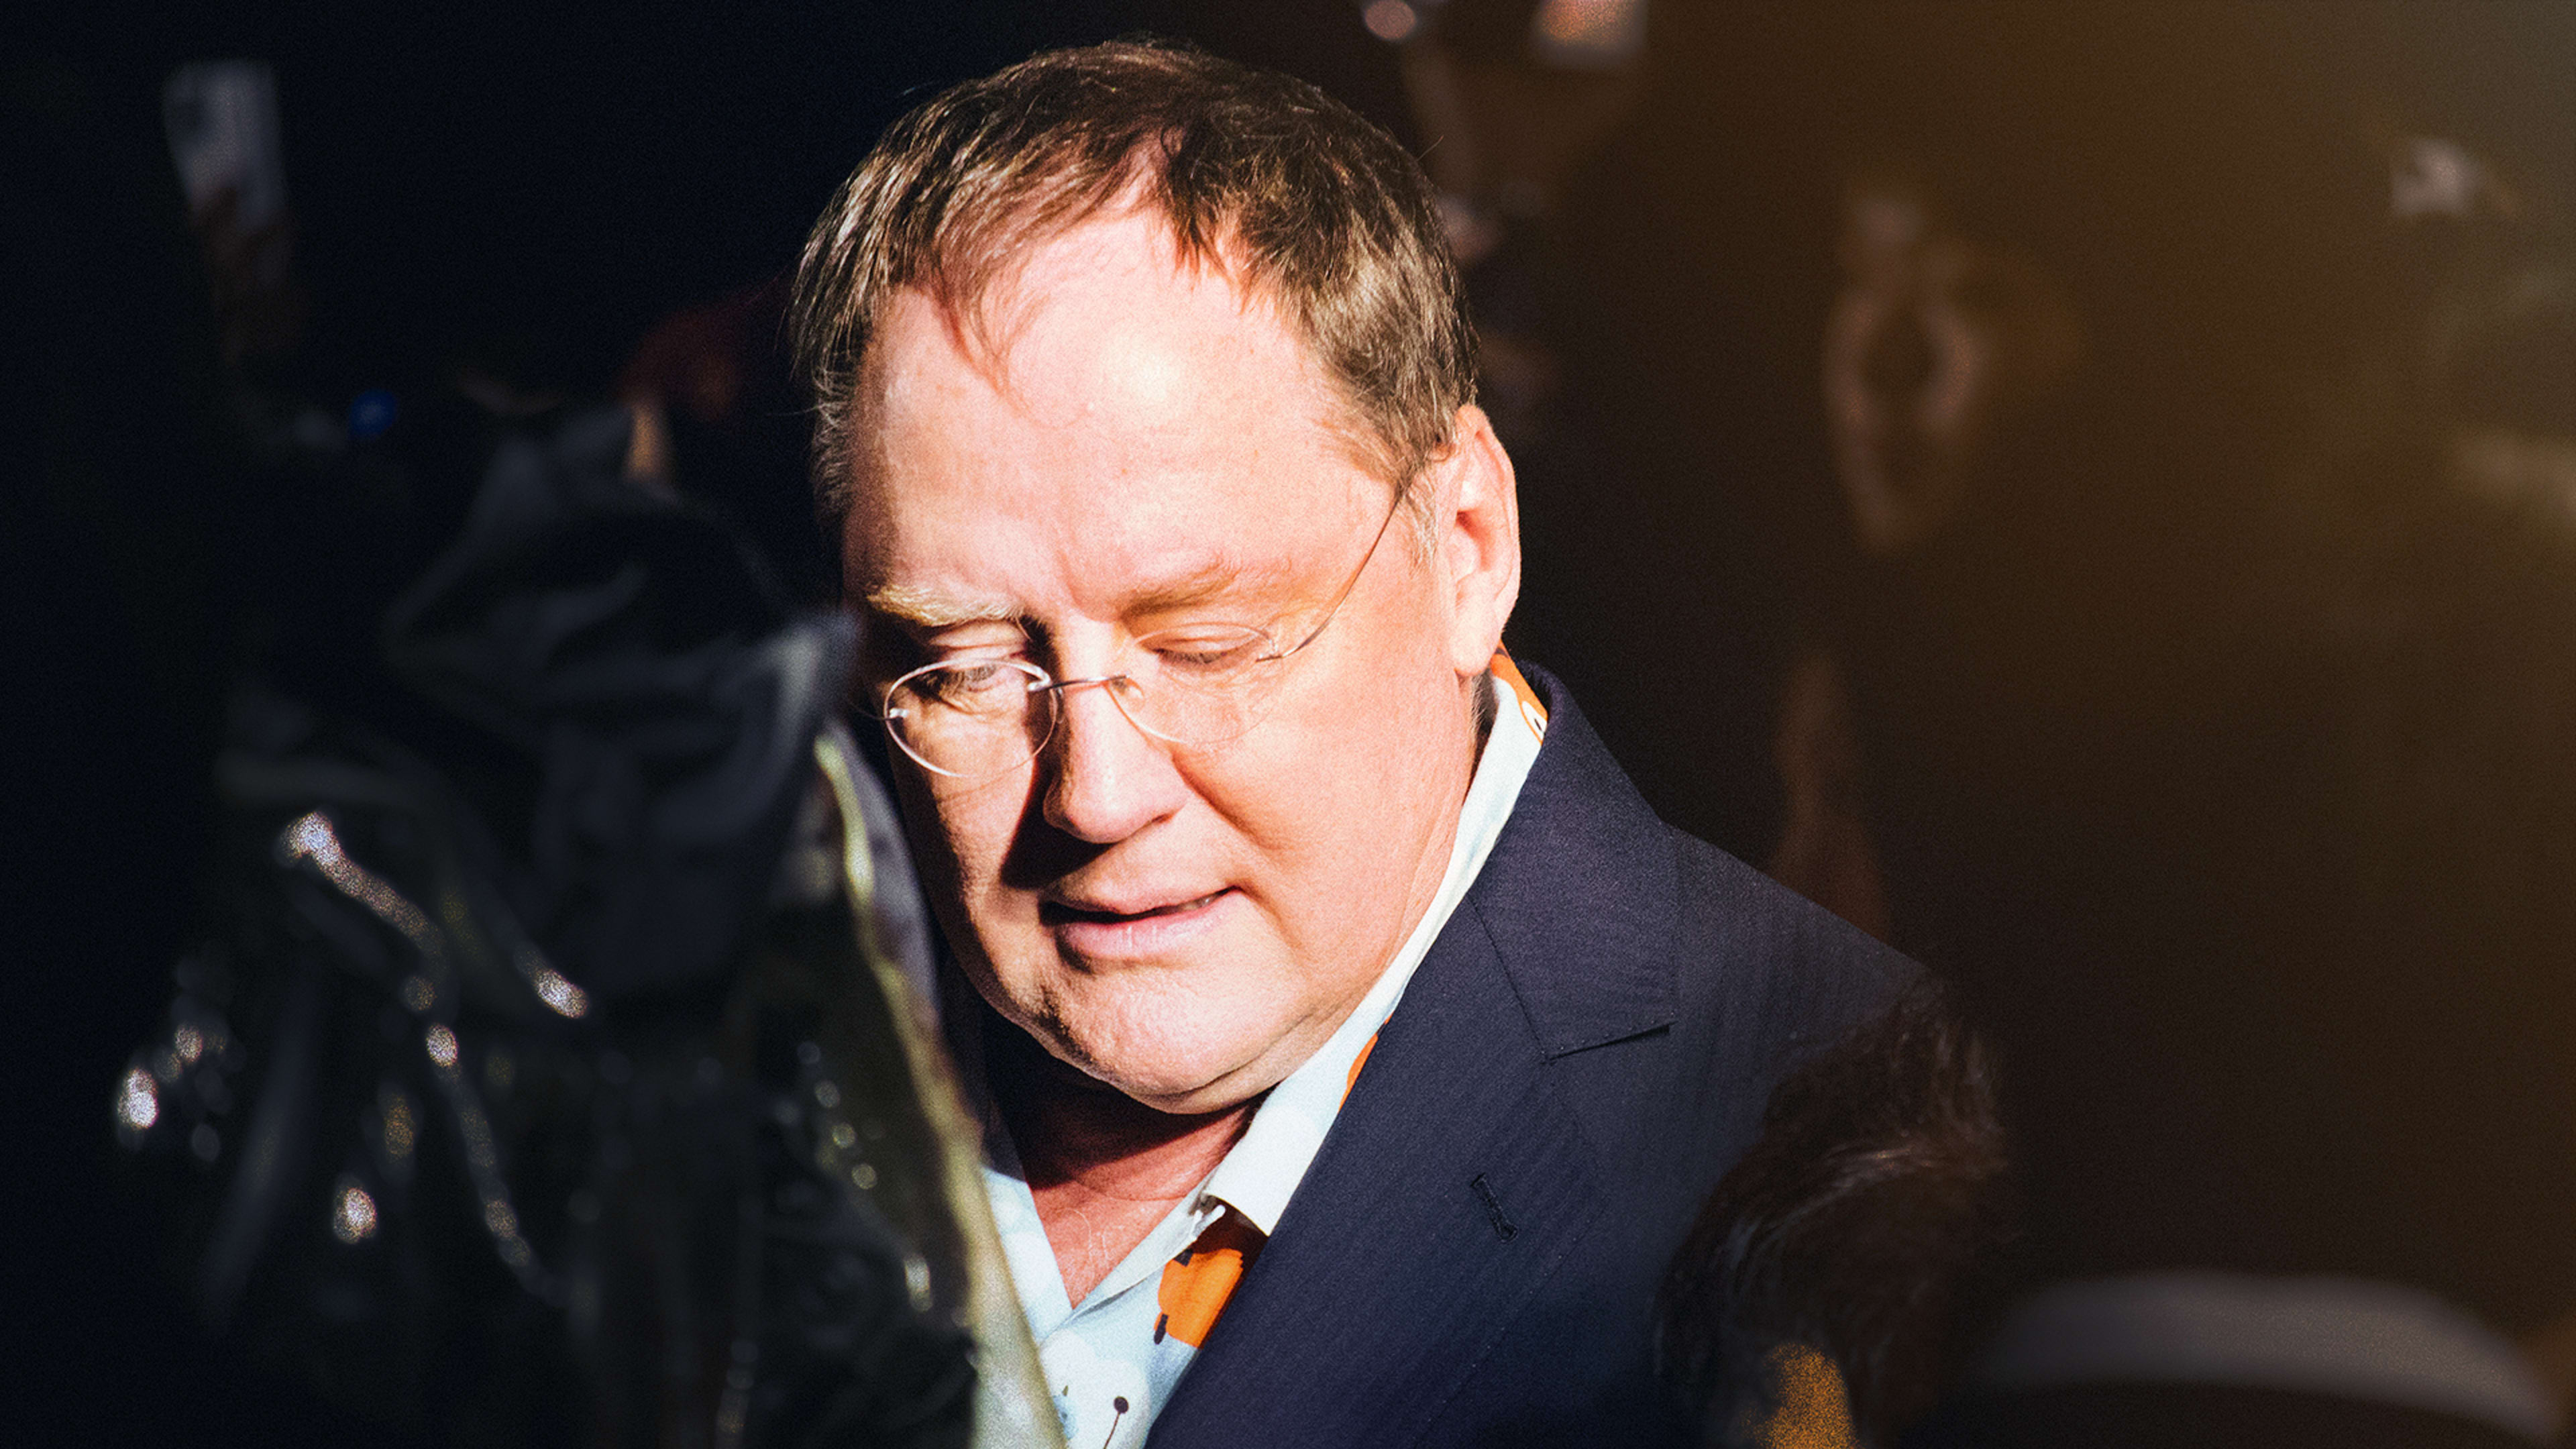 With grilling from employees at Skydance, animation czar John Lasseter’s comeback hits turbulence